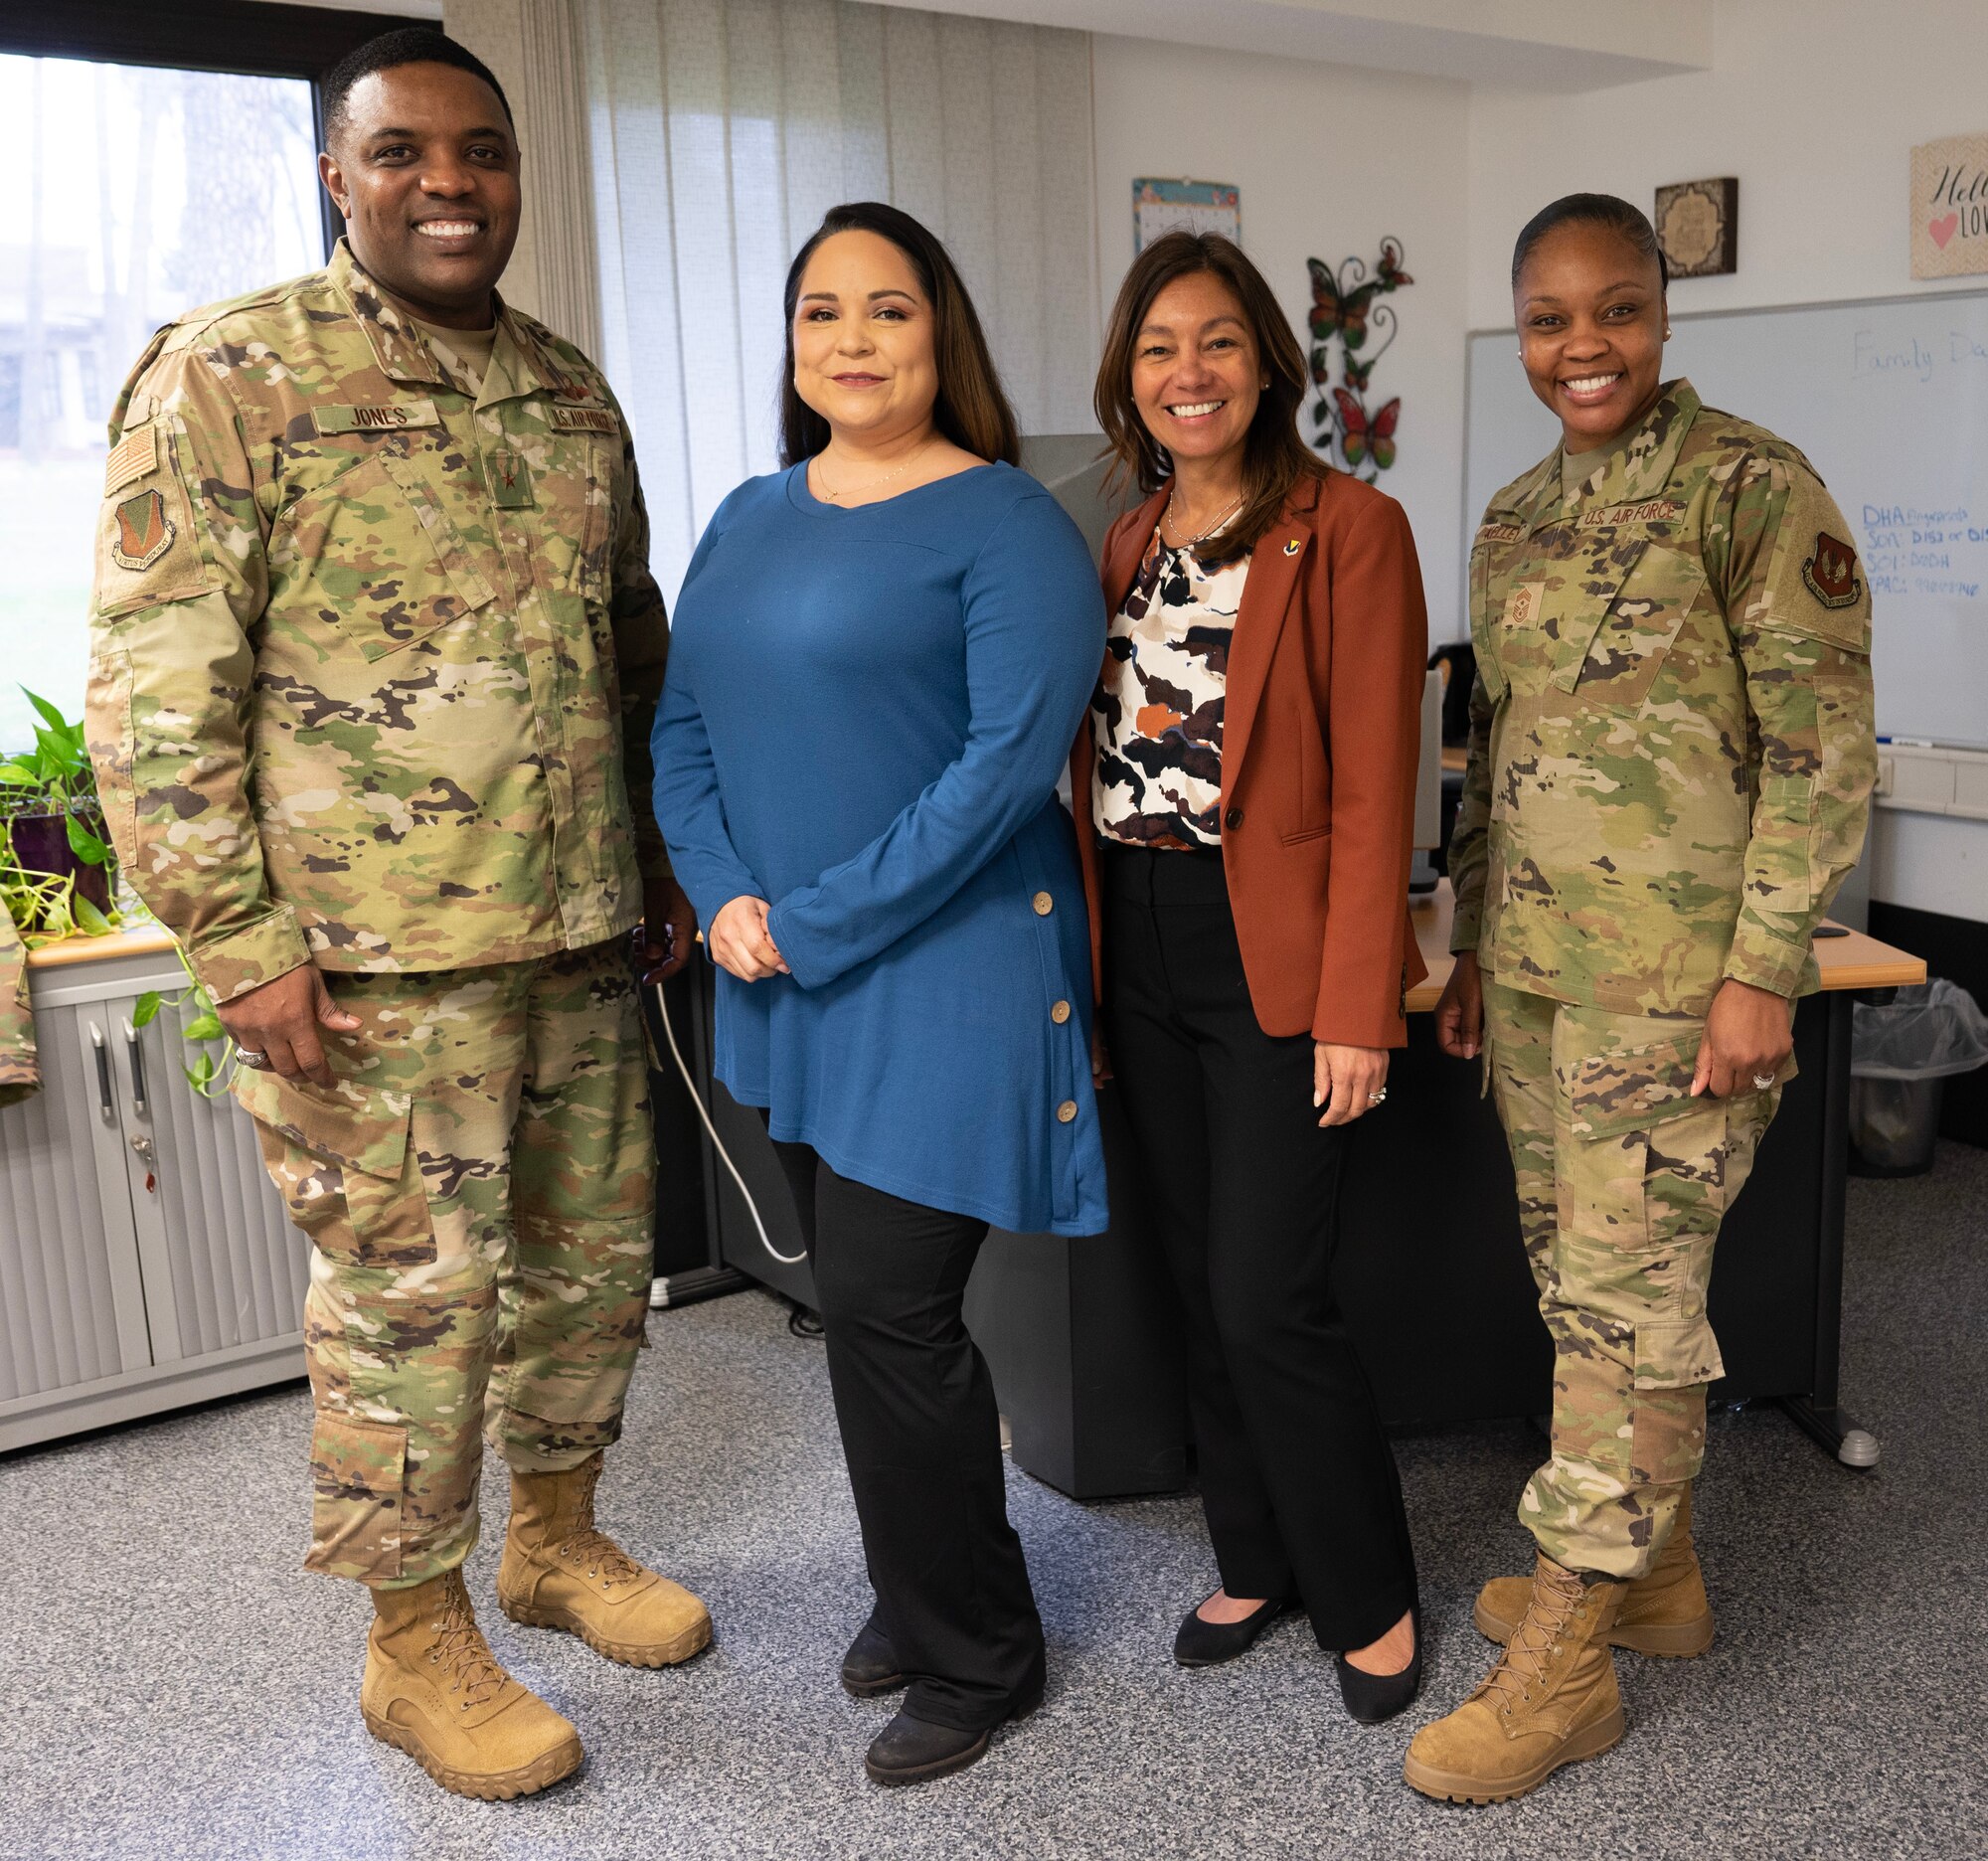 Brig. Gen. Otis C. Jones, 86th Airlift Wing commander; Valerie Dawson, 86th Airlift Wing Information Protection personnel security specialist; Renae Fischer, 86 AW vice director; Chief Master Sgt. Charmaine Kelley, 86th AW command chief,